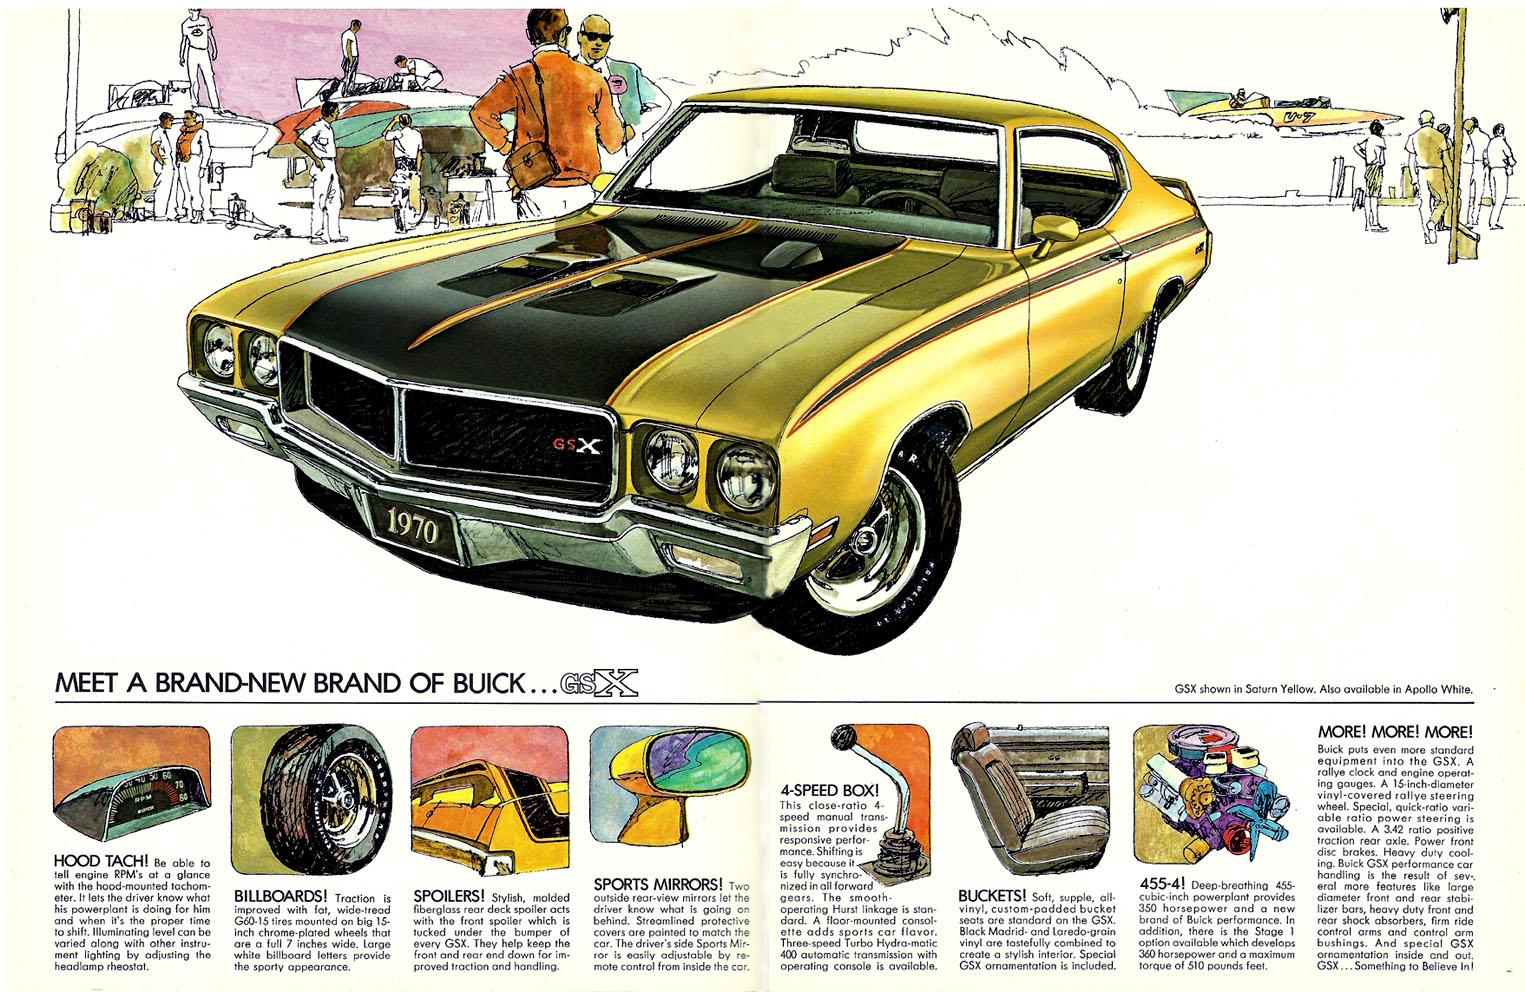 1970s Buick Logo - Musclecars You Should Know: 1970 Buick GSX/GSX Stage 1 - Street Muscle